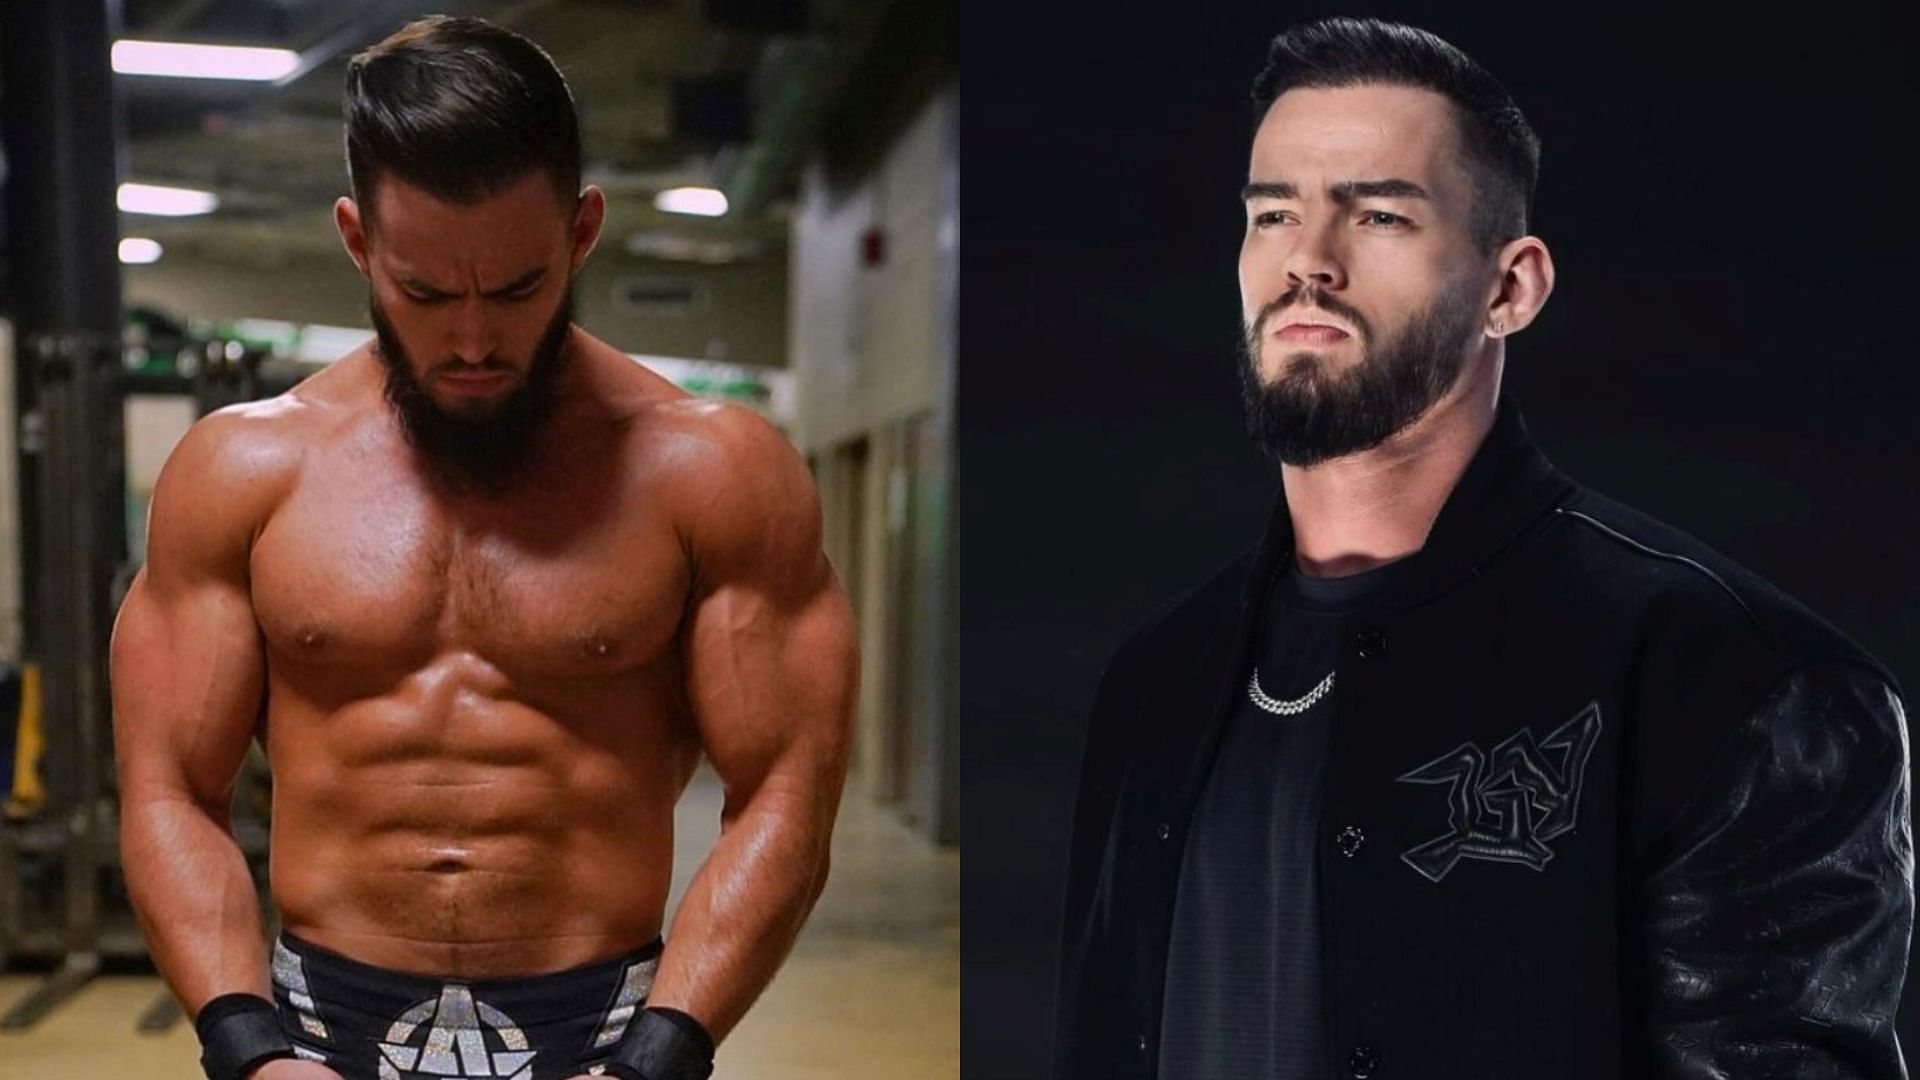 Theory has improved his physique over the years.